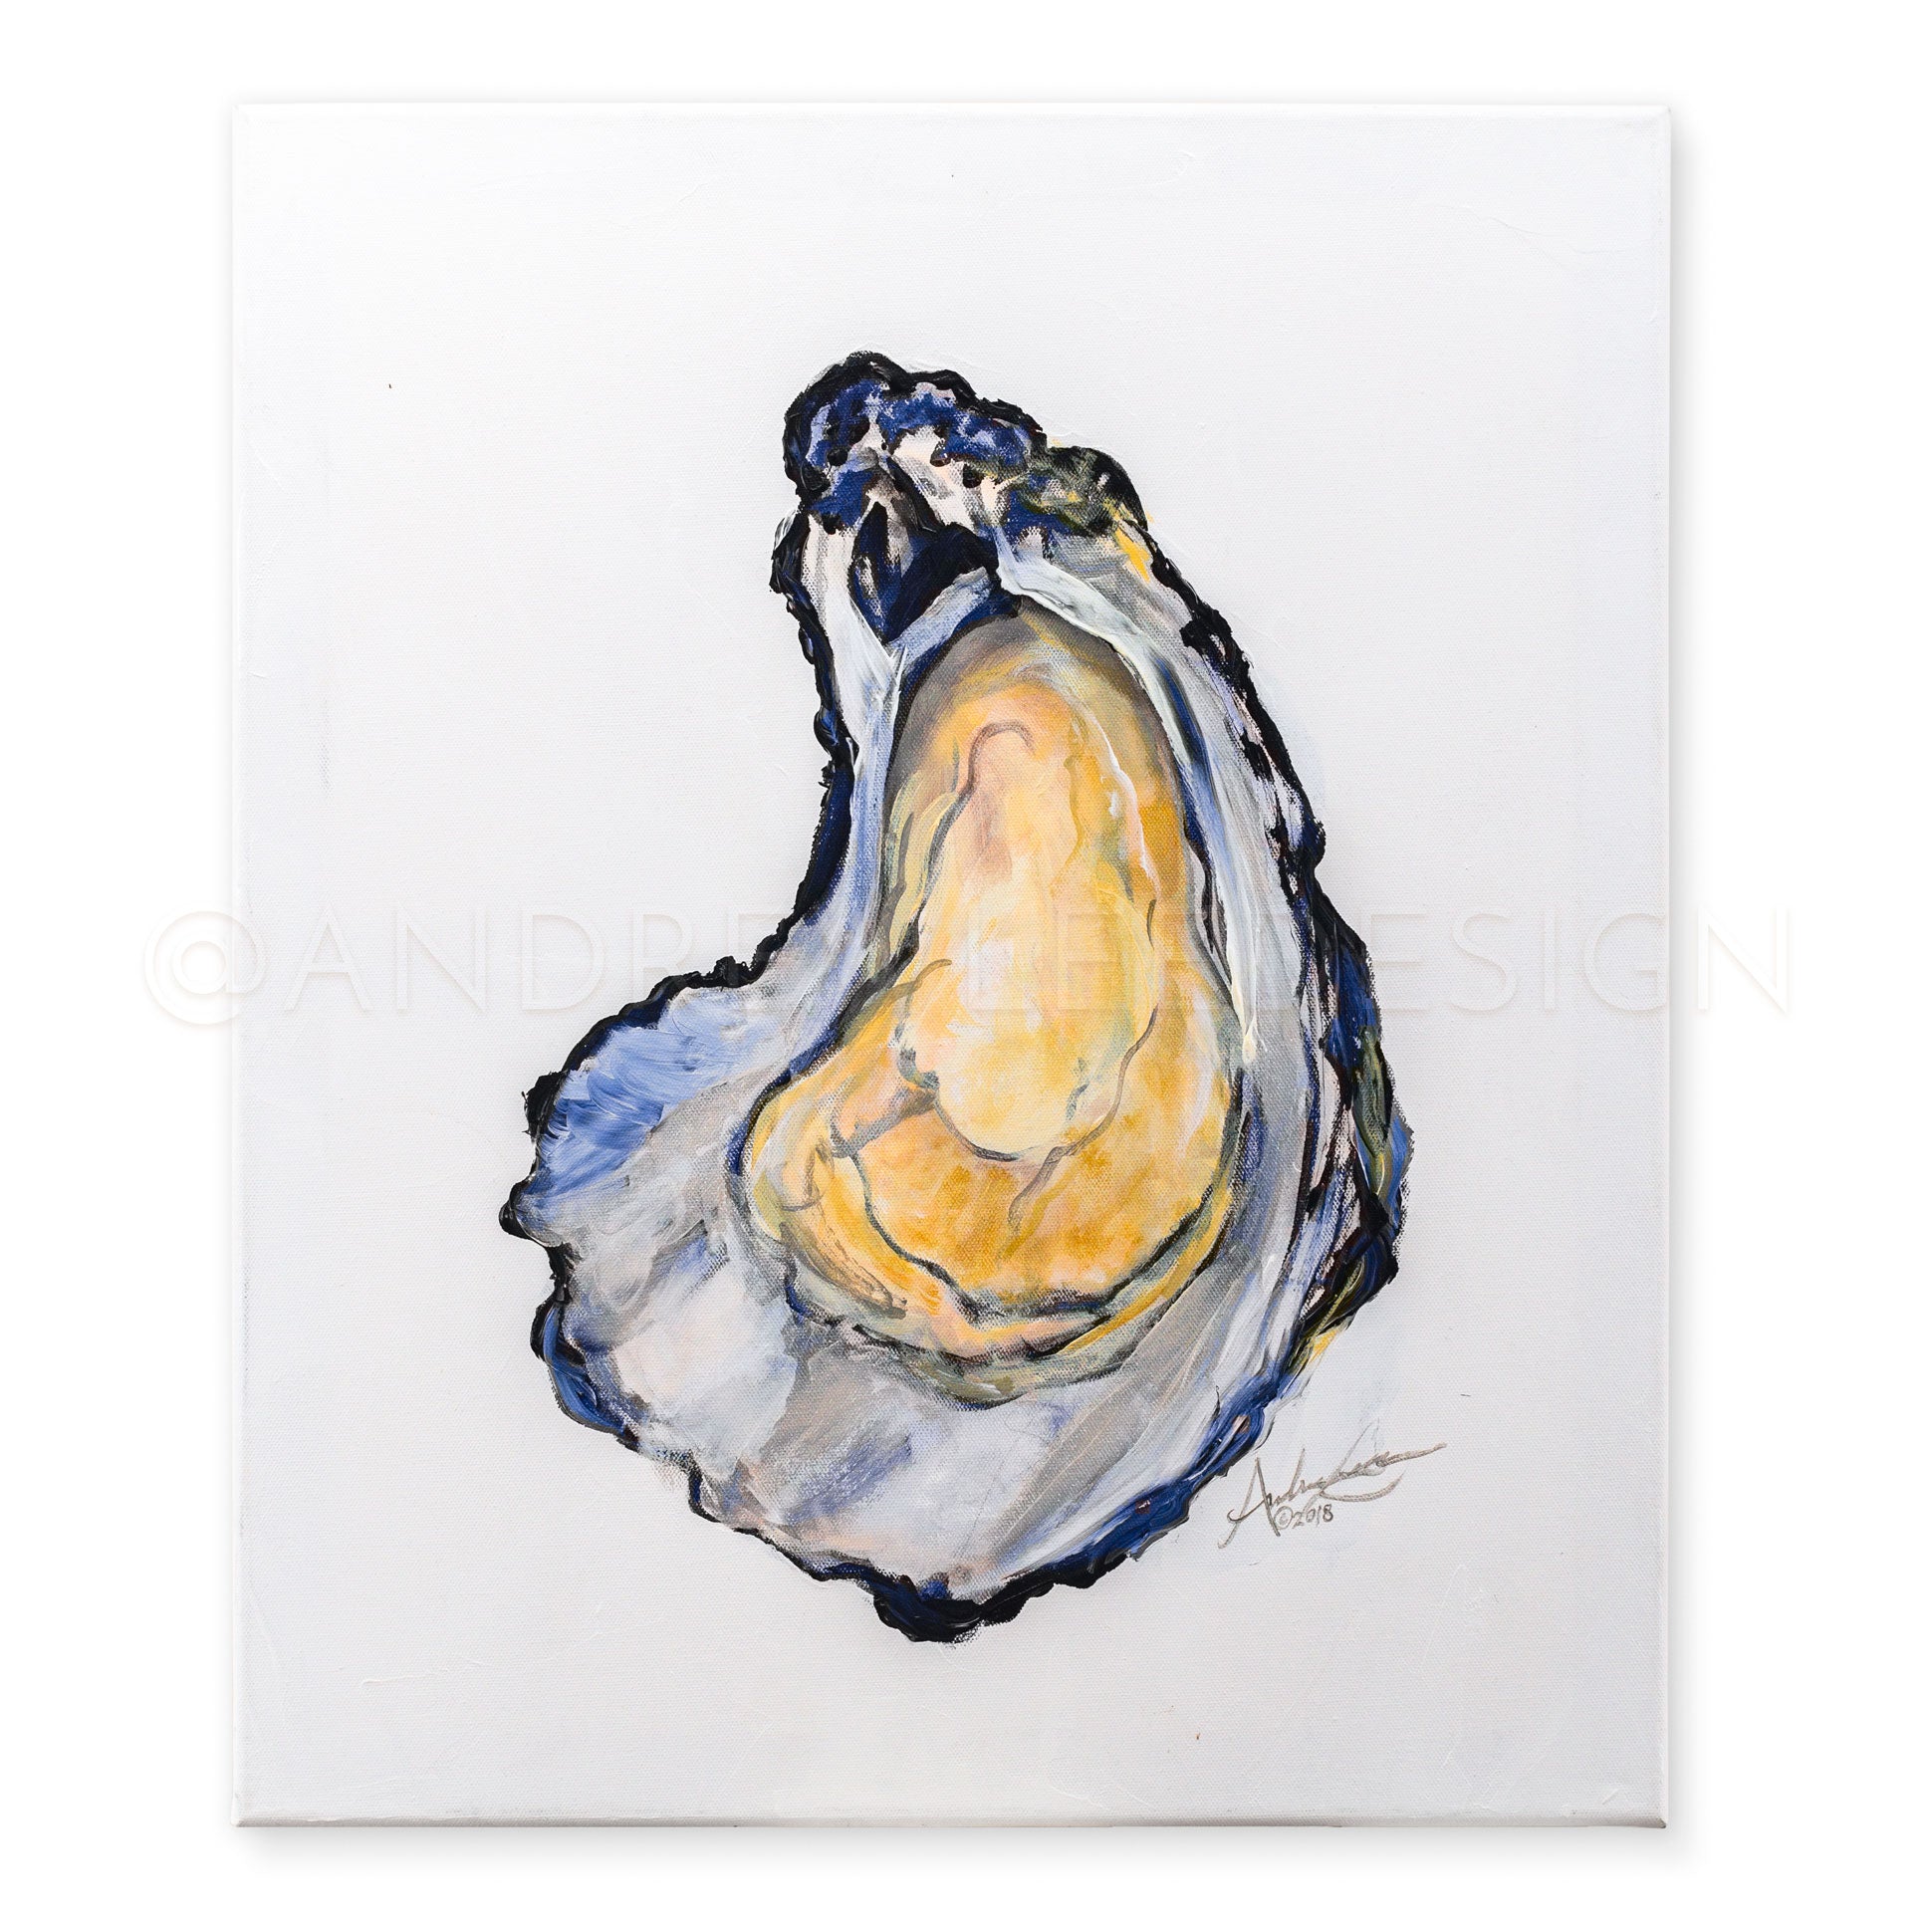 Oyster 1 of 2, 20x24”